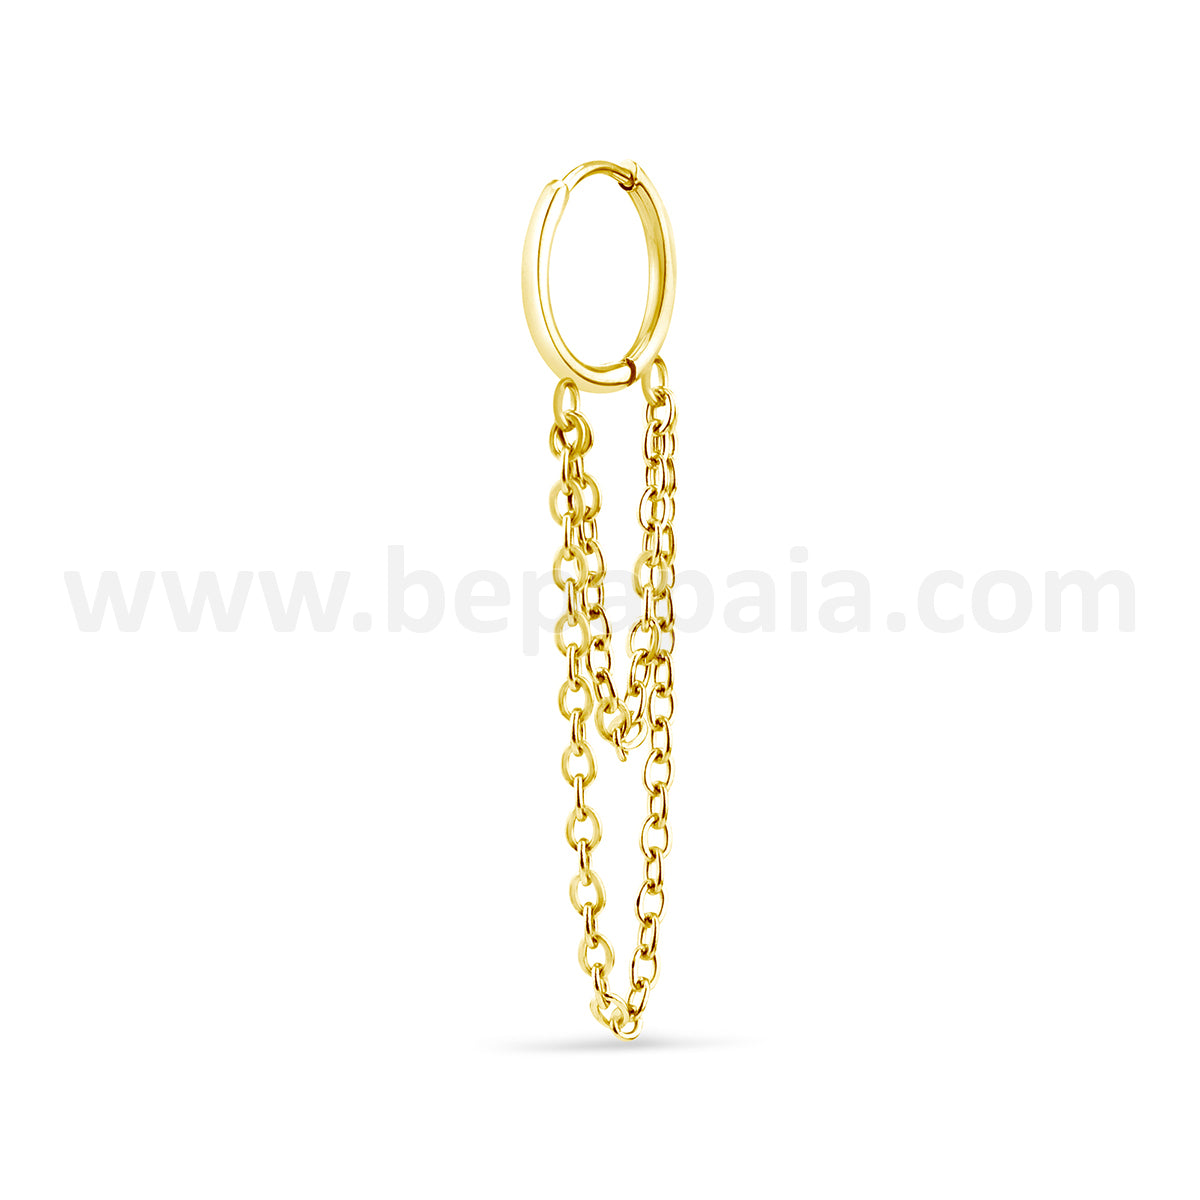 Stainless steel hoop earring with double chain  